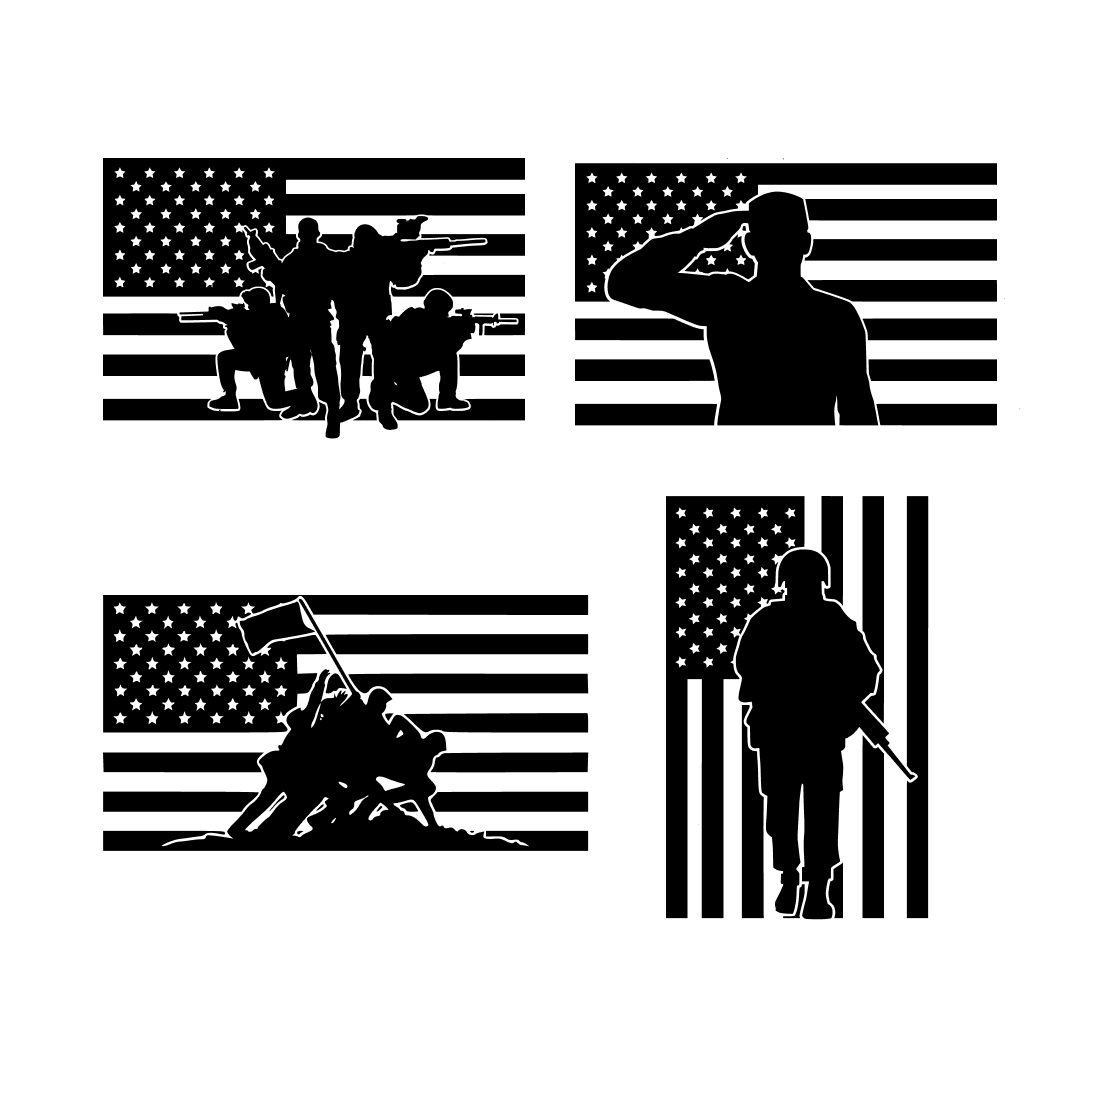 Military silhouettes on the background of the American flag in black and white.